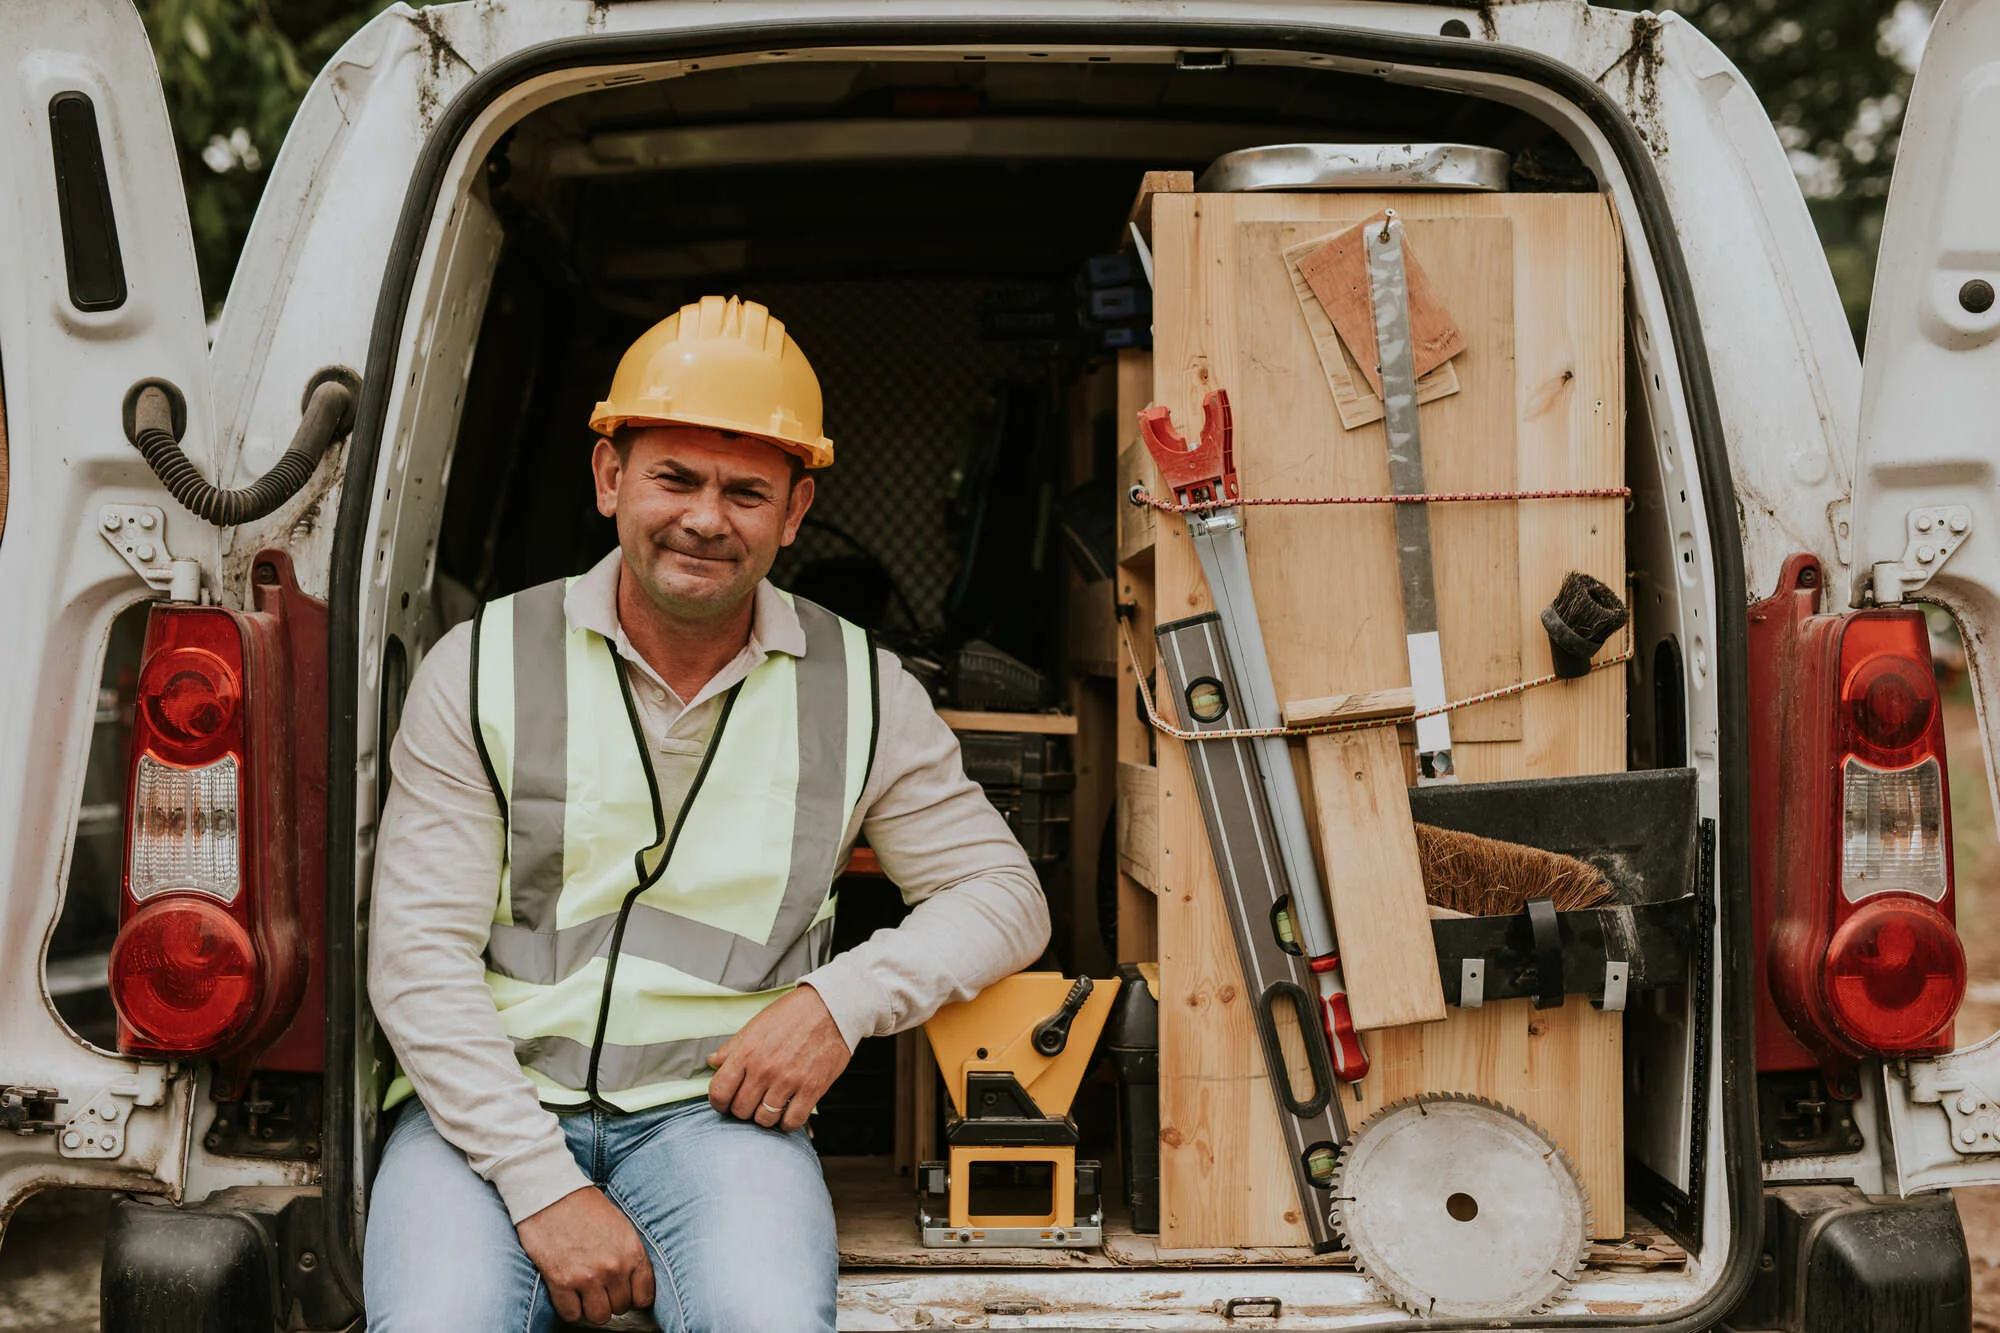 Builder sat in the back of his work van next to his tools